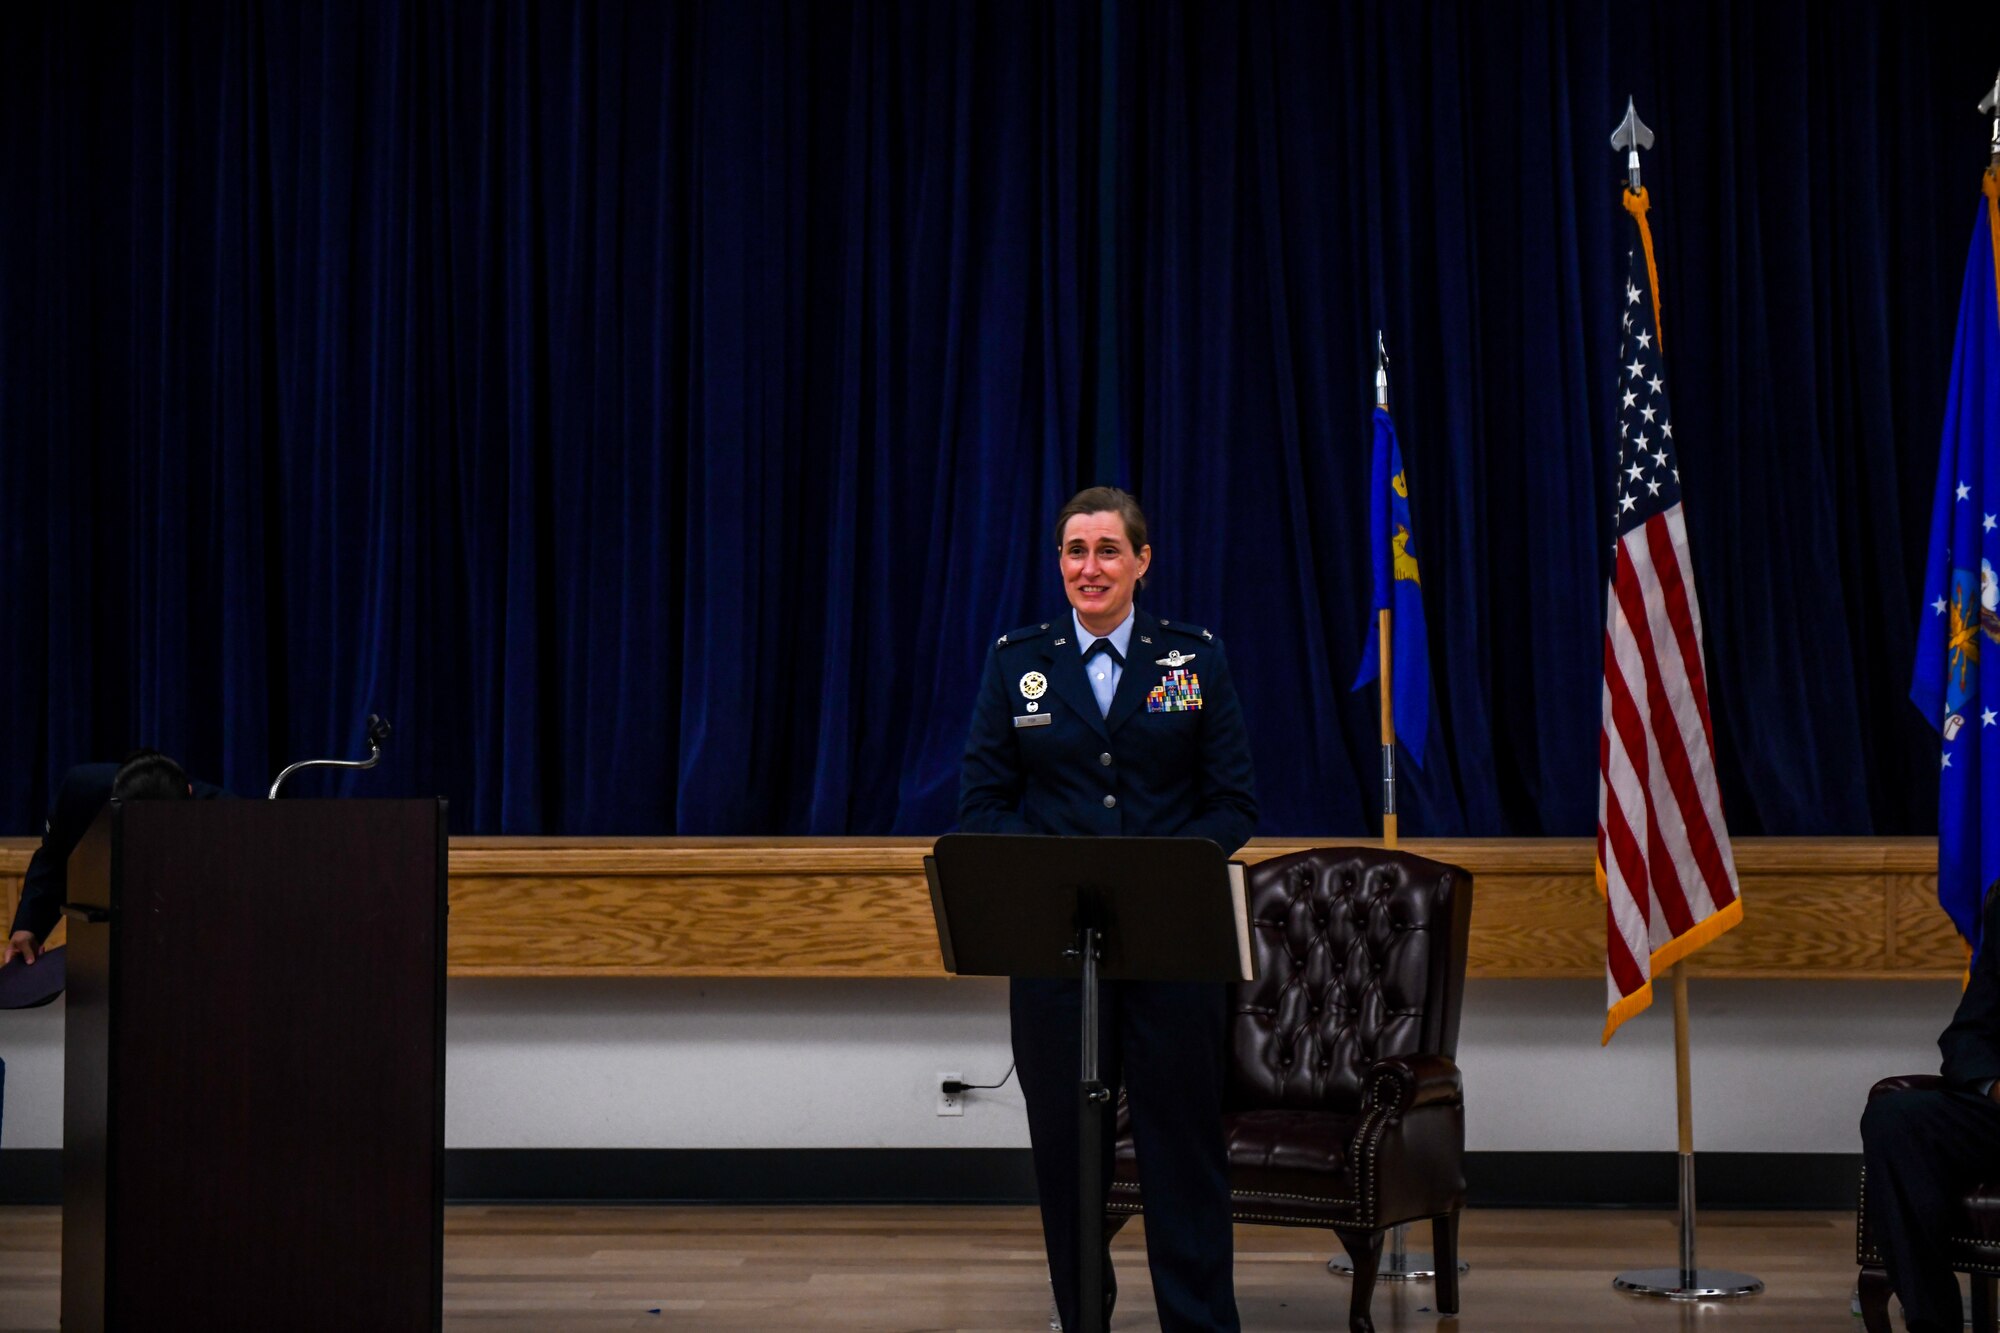 Col. Heather Fox assumed command of the 9th Reconnaissance Wing and Beale Air Force Base during a change of command ceremony June 11, 2020, at Beale Air Force Base, California.